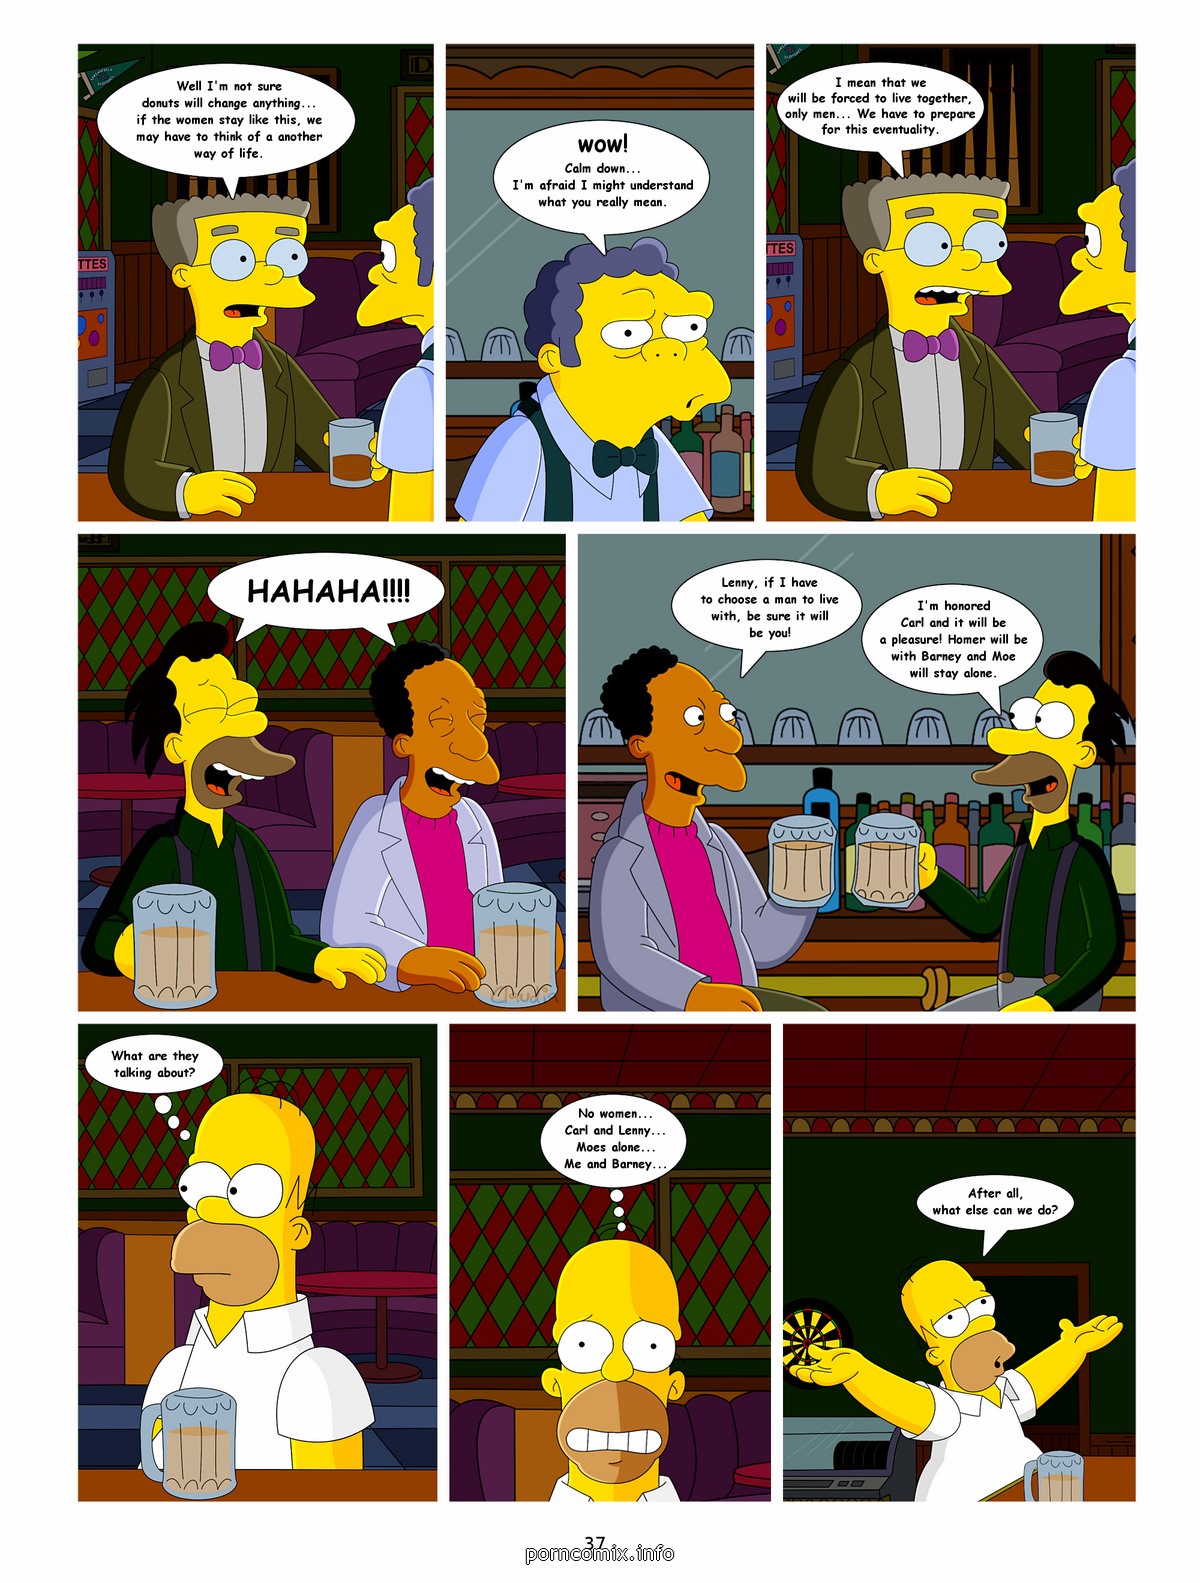 The Simpsons -Conquest of Springfield - part 3